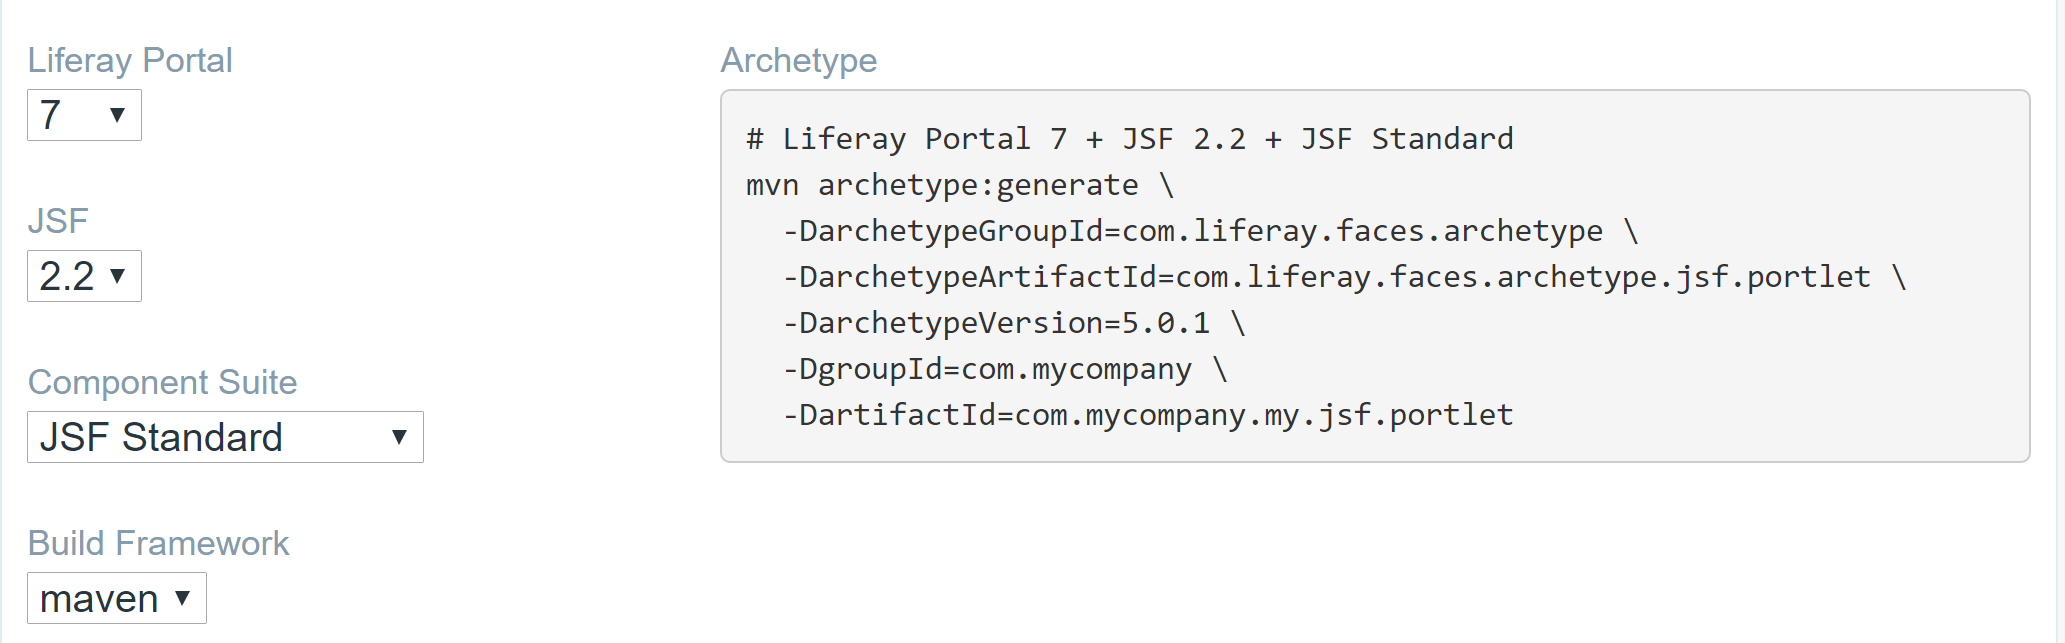 Figure 1: You can select the Liferay Portal version, JSF version, and component suite for your archetype generation command.